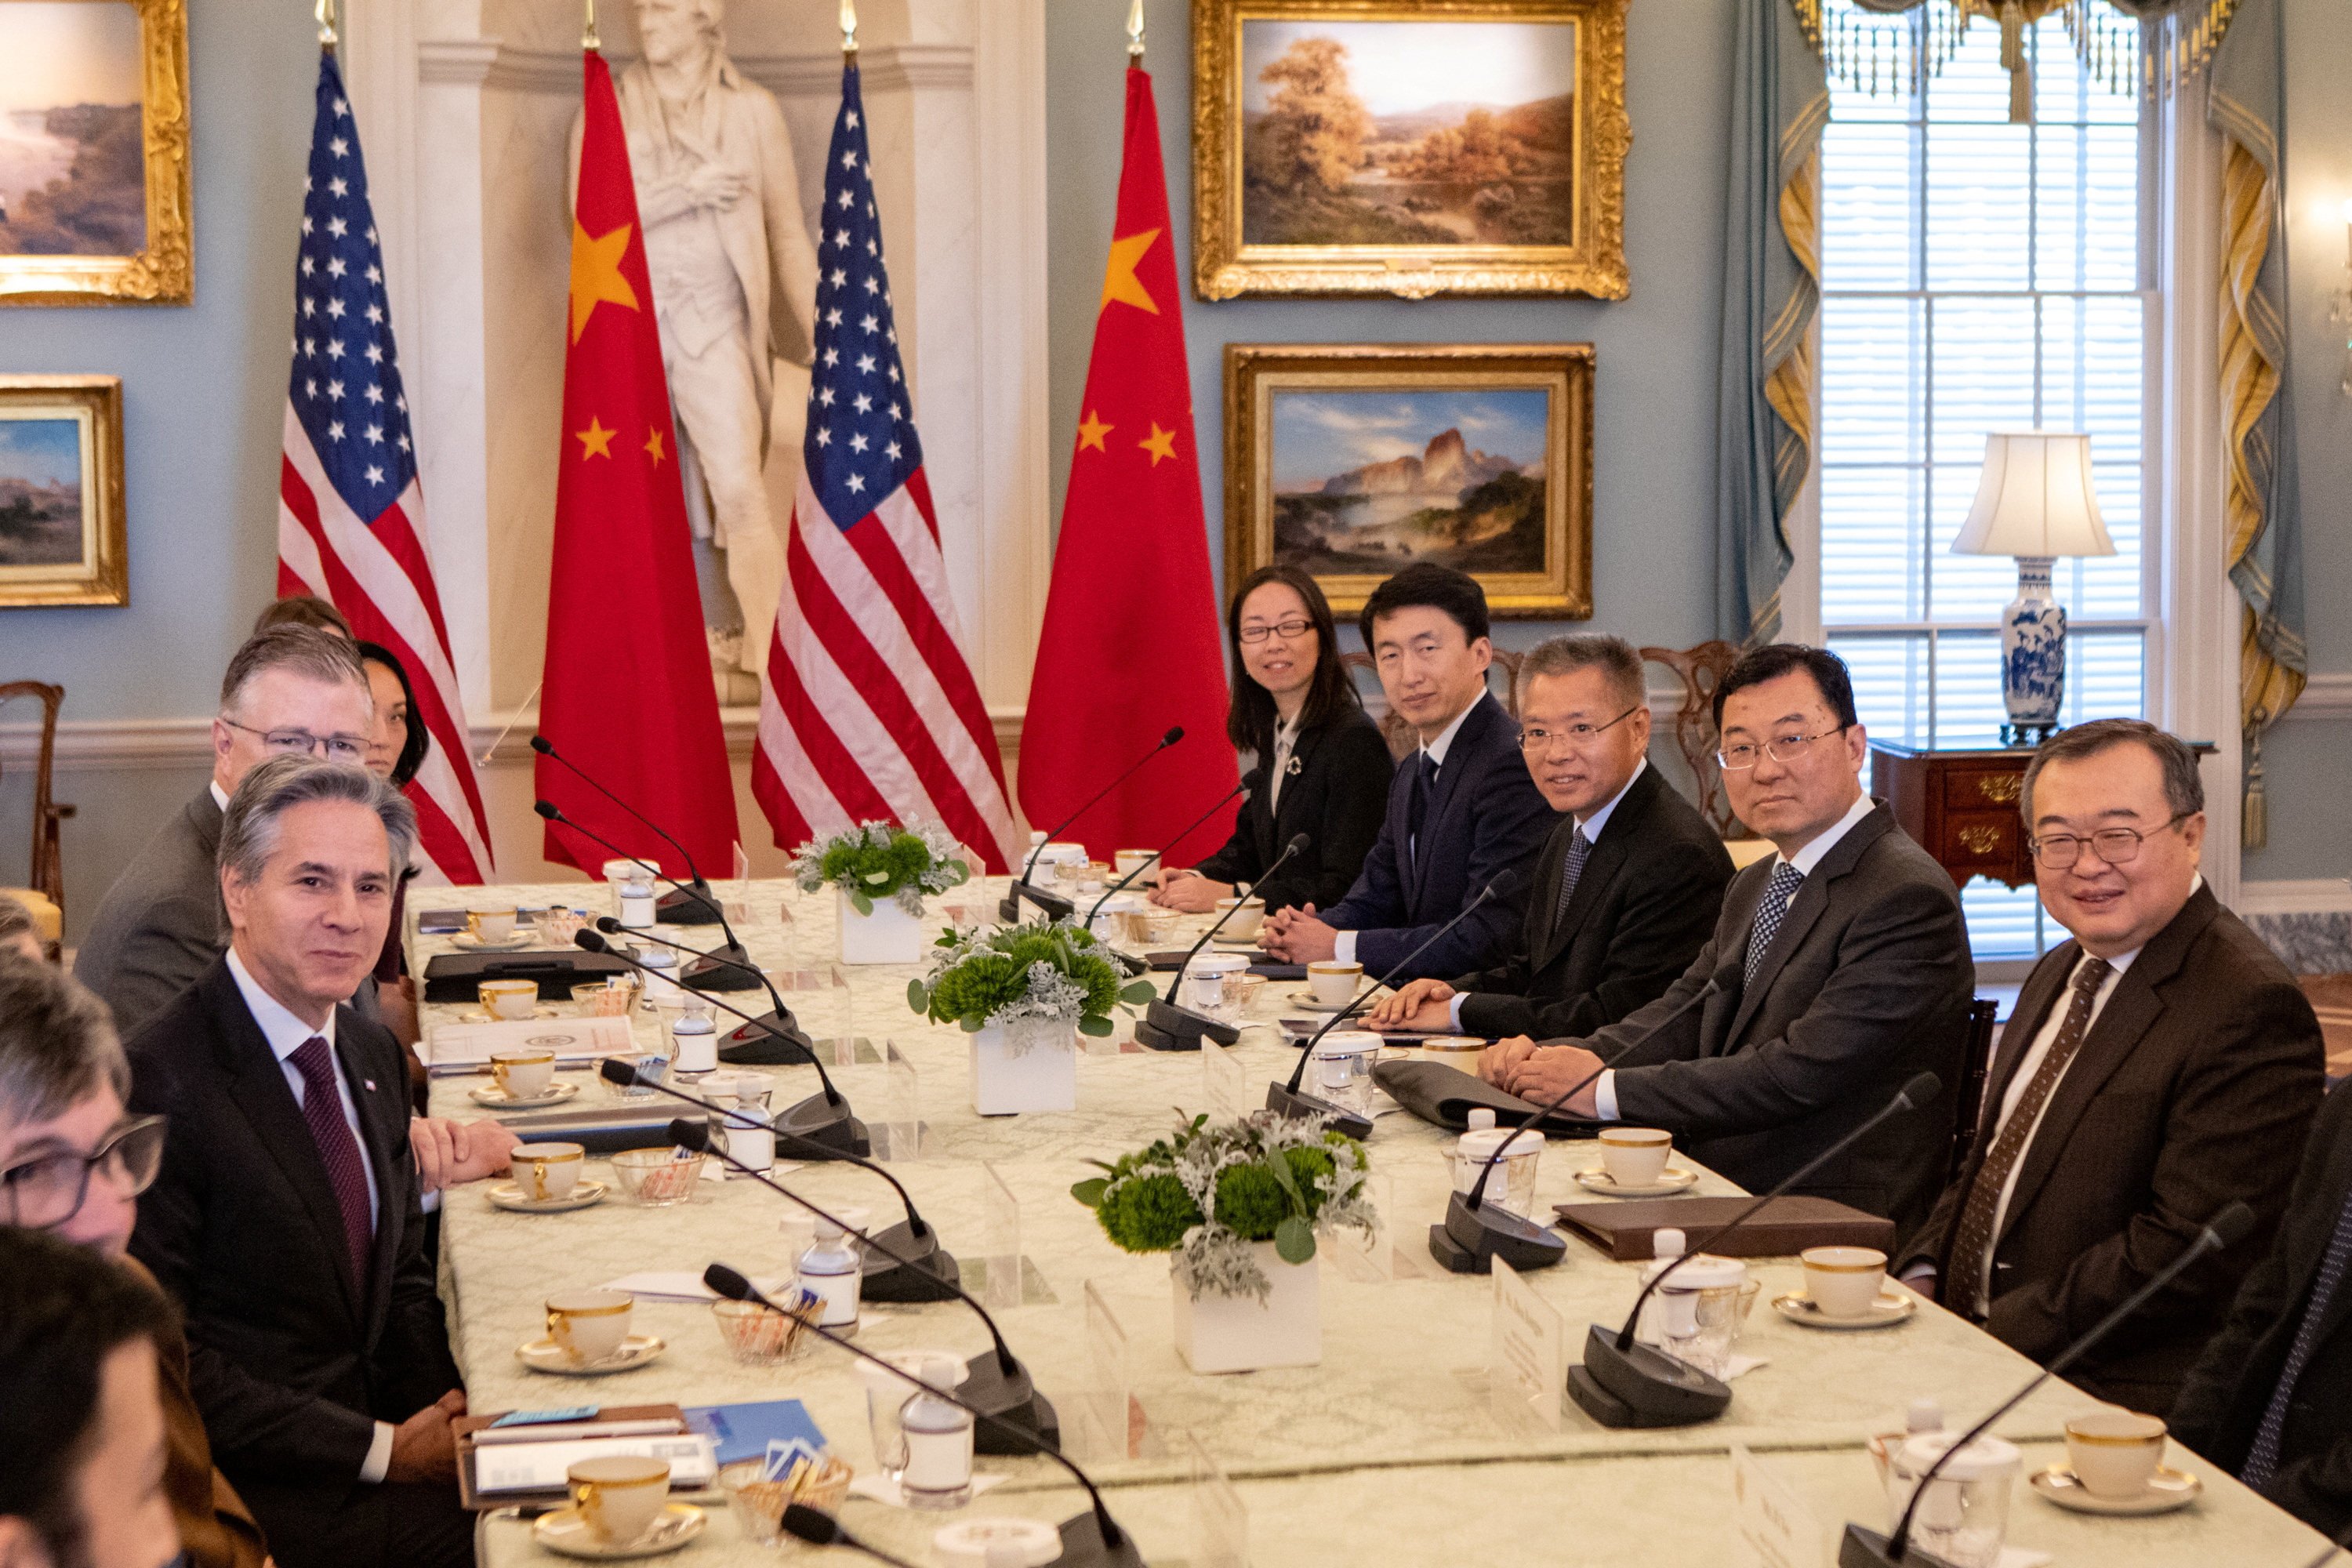 US Secretary of State Antony Blinken (left) meets Liu Jianchao (right, seated across Blinken), head of international liaison for China’s Communist Party, at the State Department in Washington on Friday. Photo: Reuters